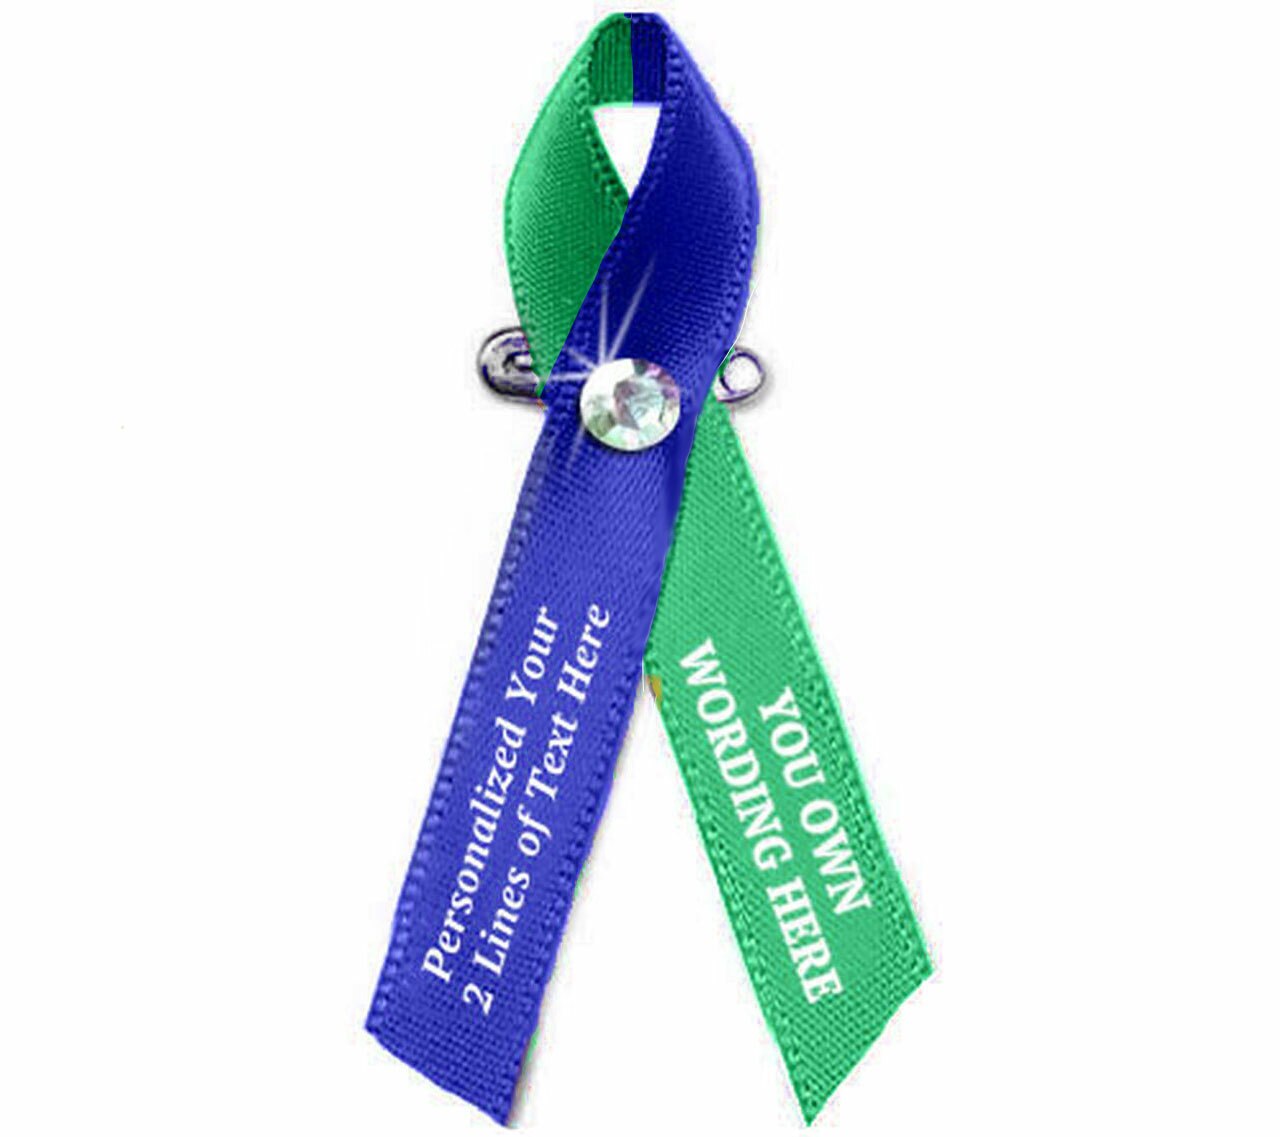 Customize Your Own 2 Color Awareness Ribbon - Pack of 10.